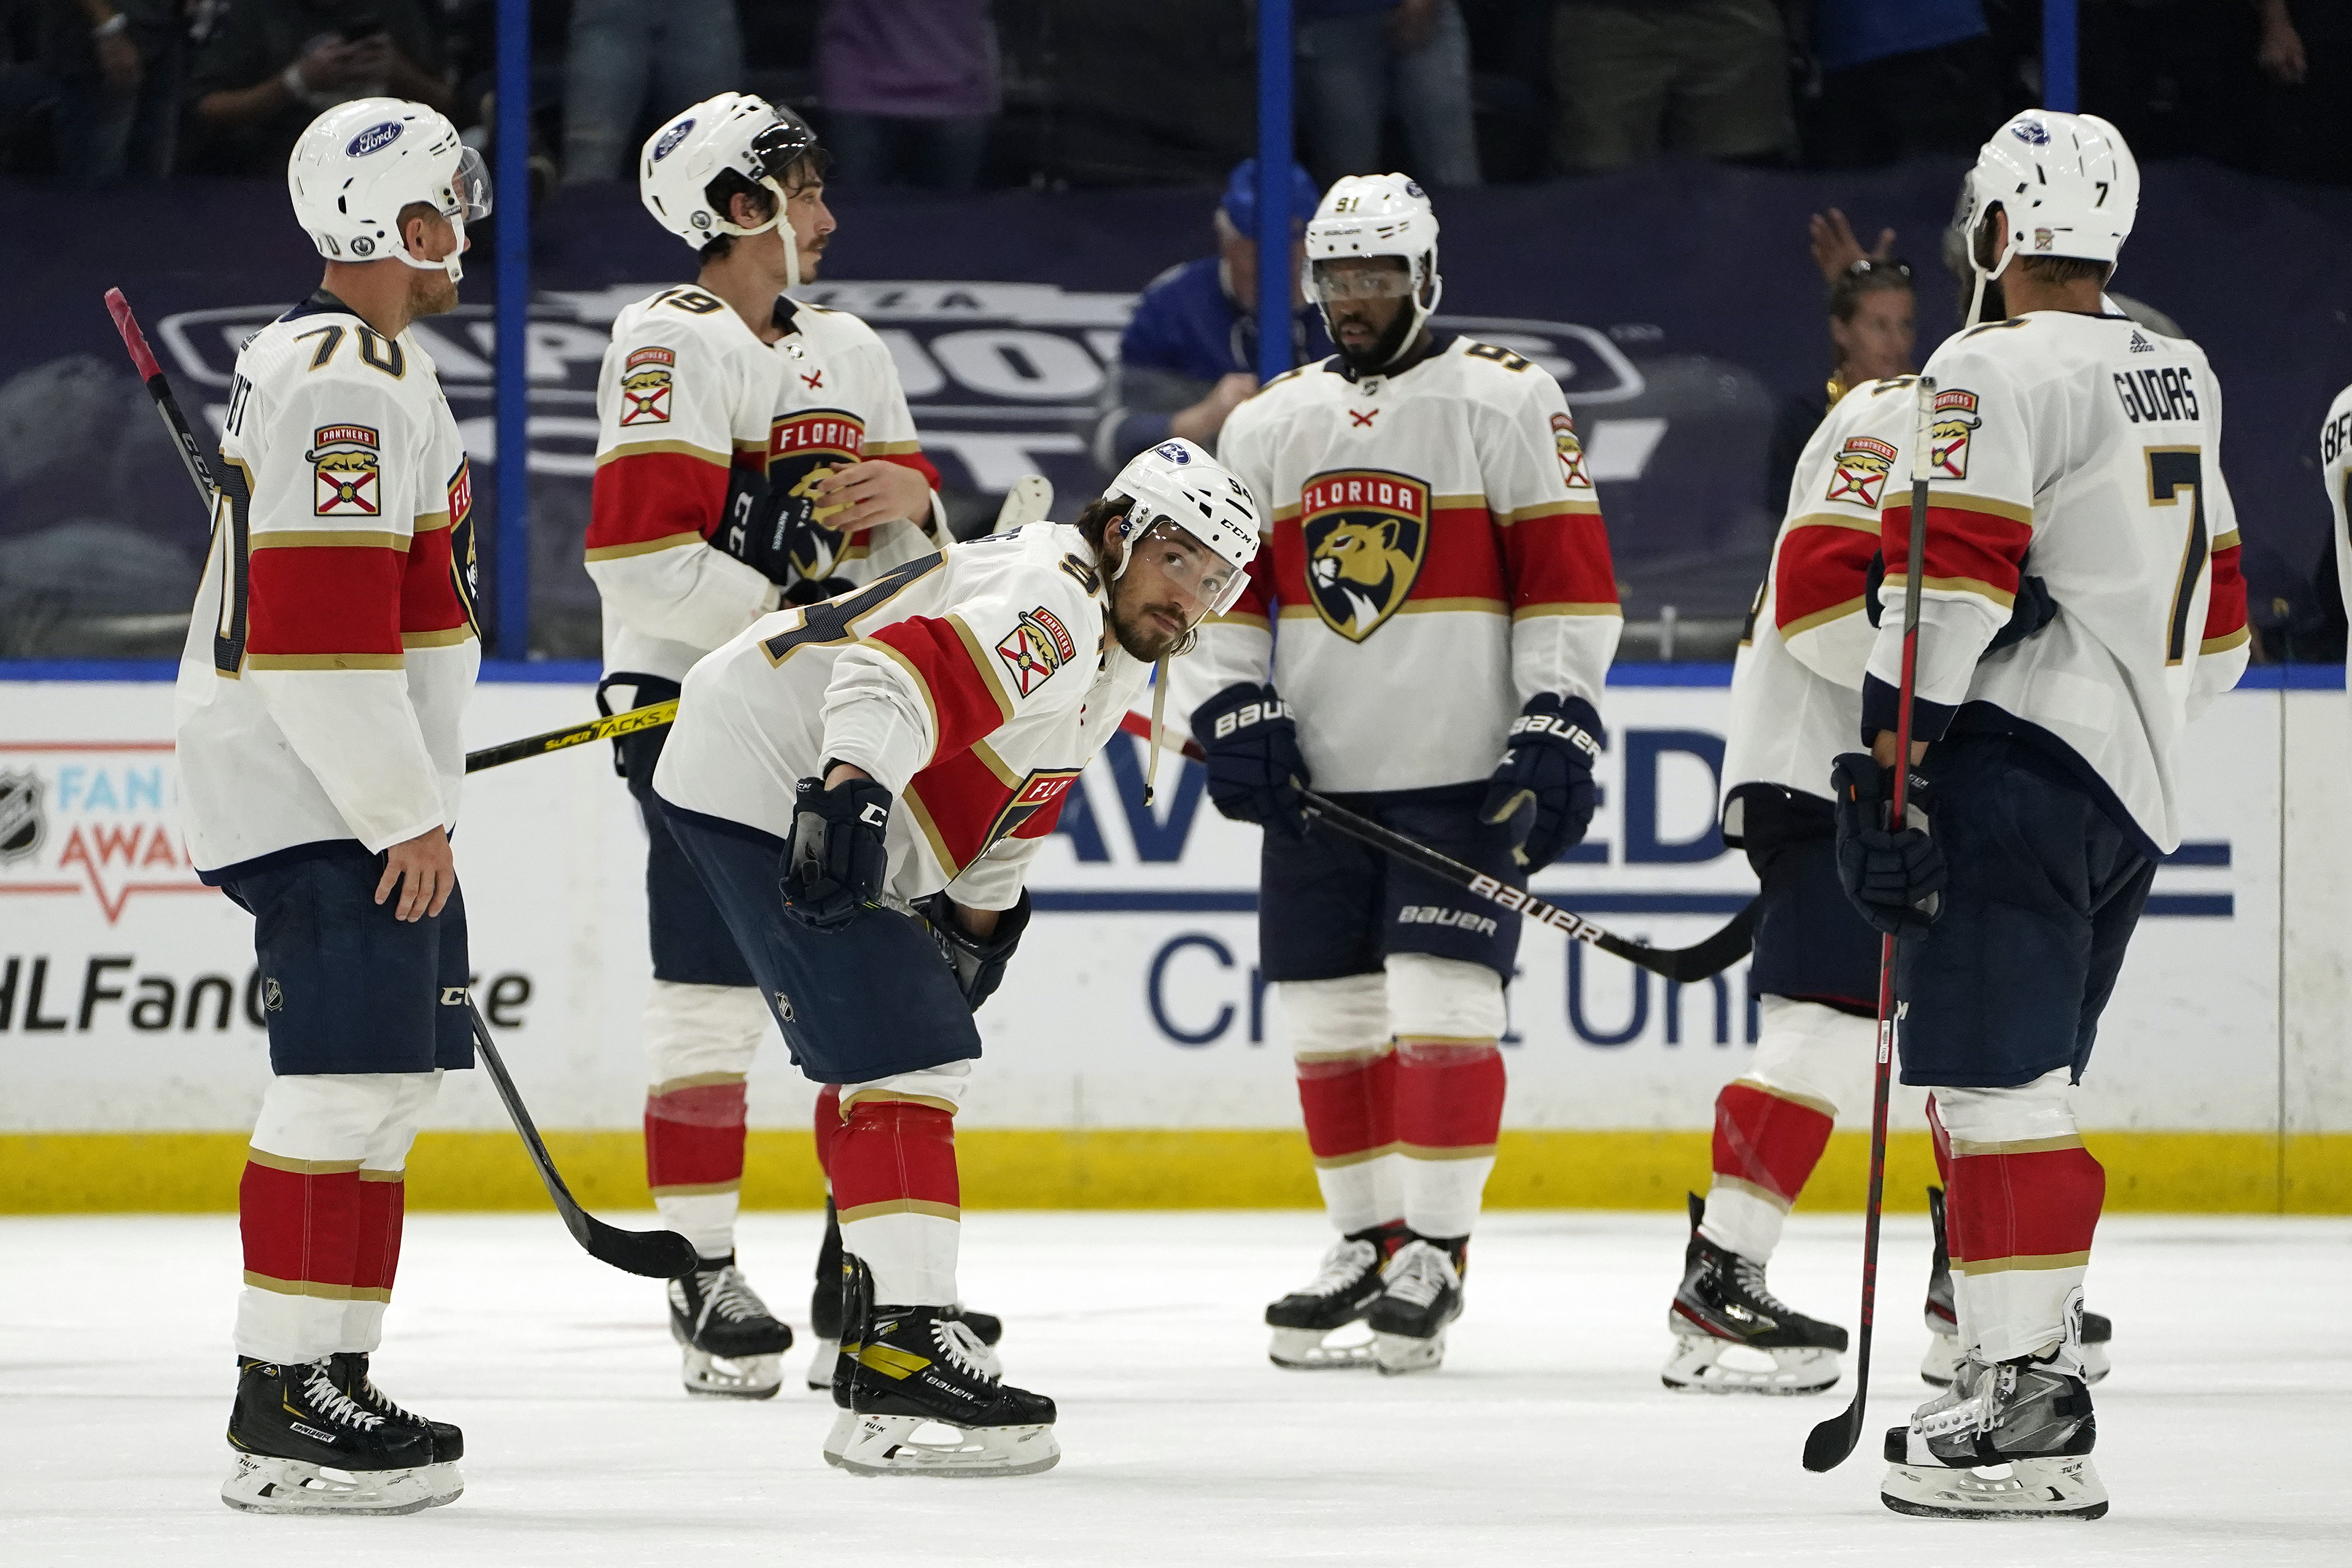 Florida Panthers: Aleksander Barkov Could Win the Selke Trophy this Year